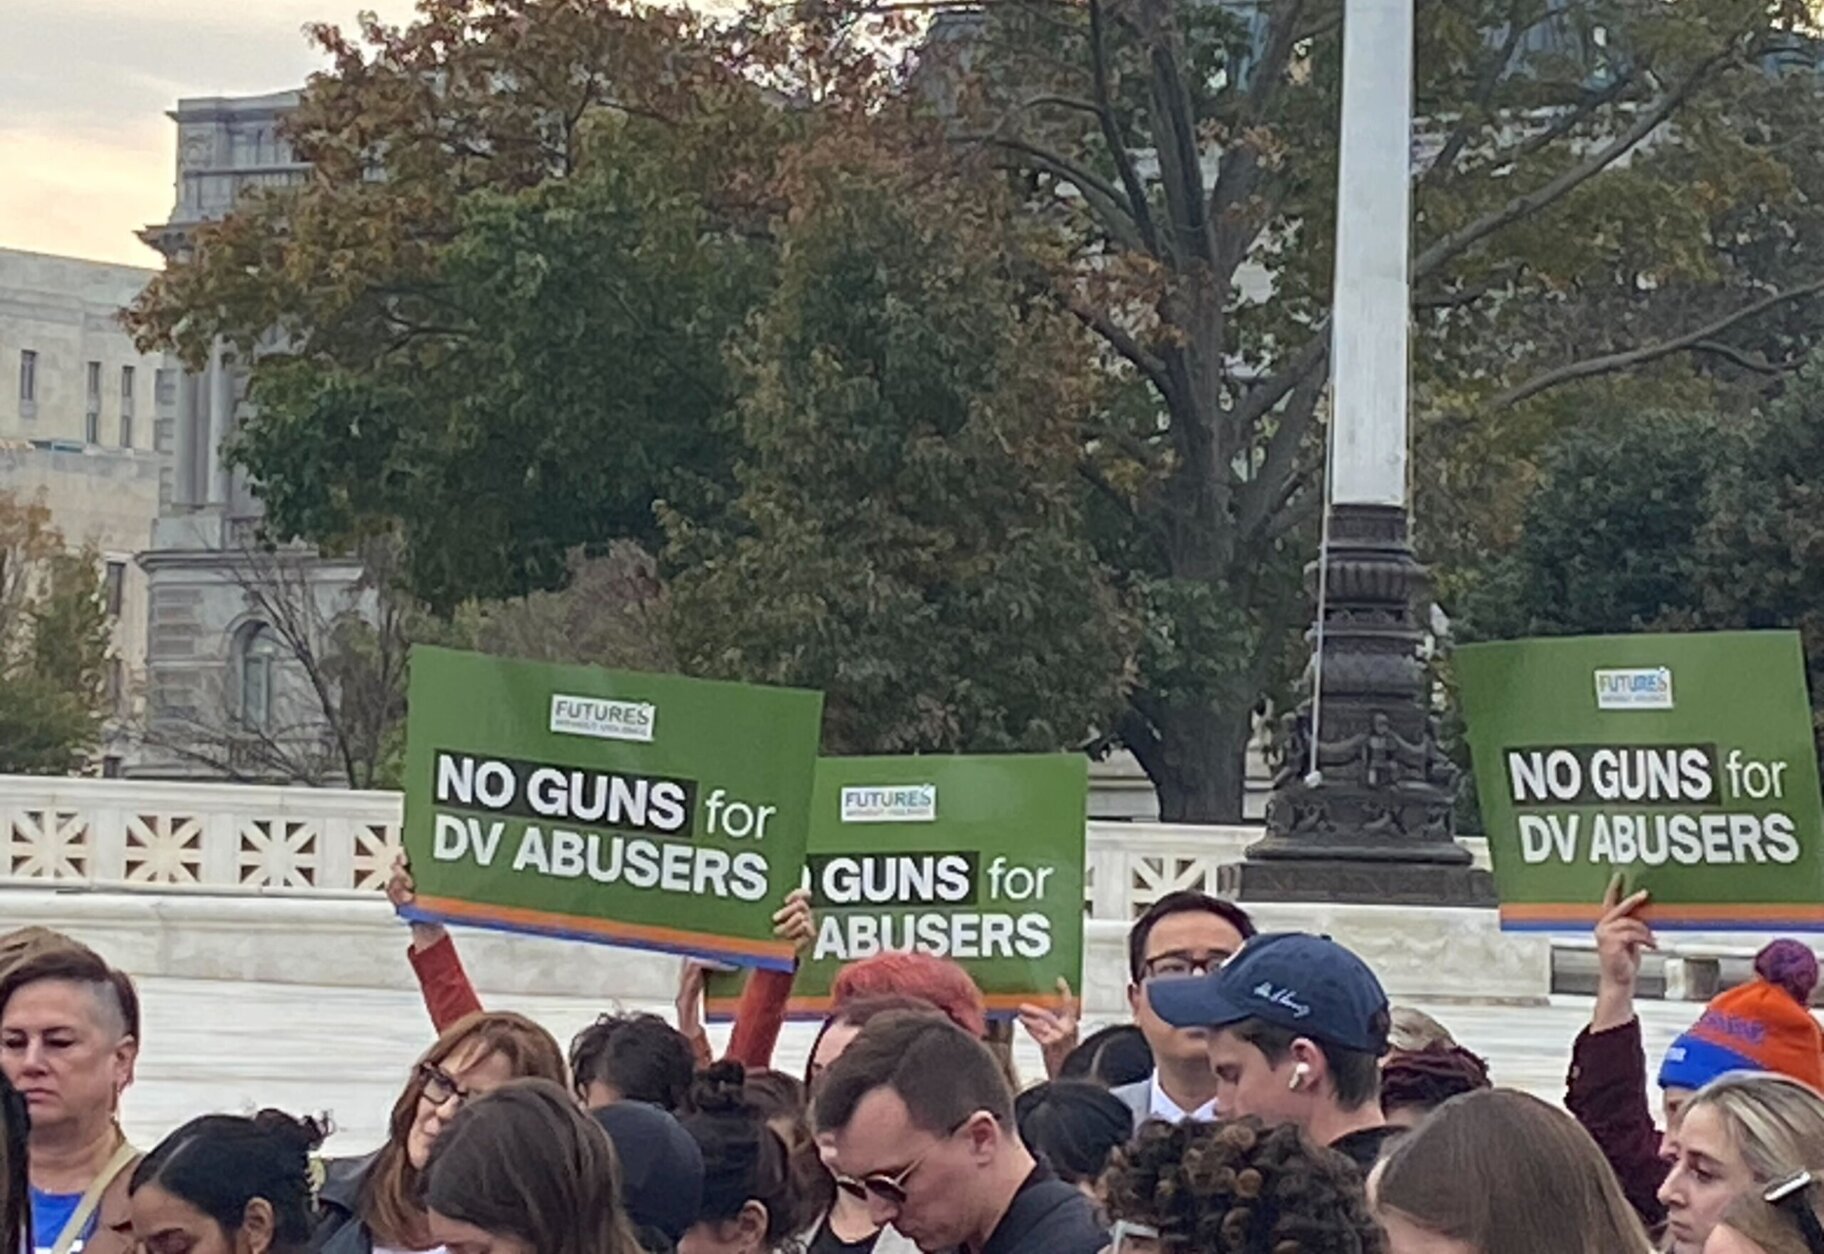 Attendees carried signs that said "No Guns for DV Abusers."